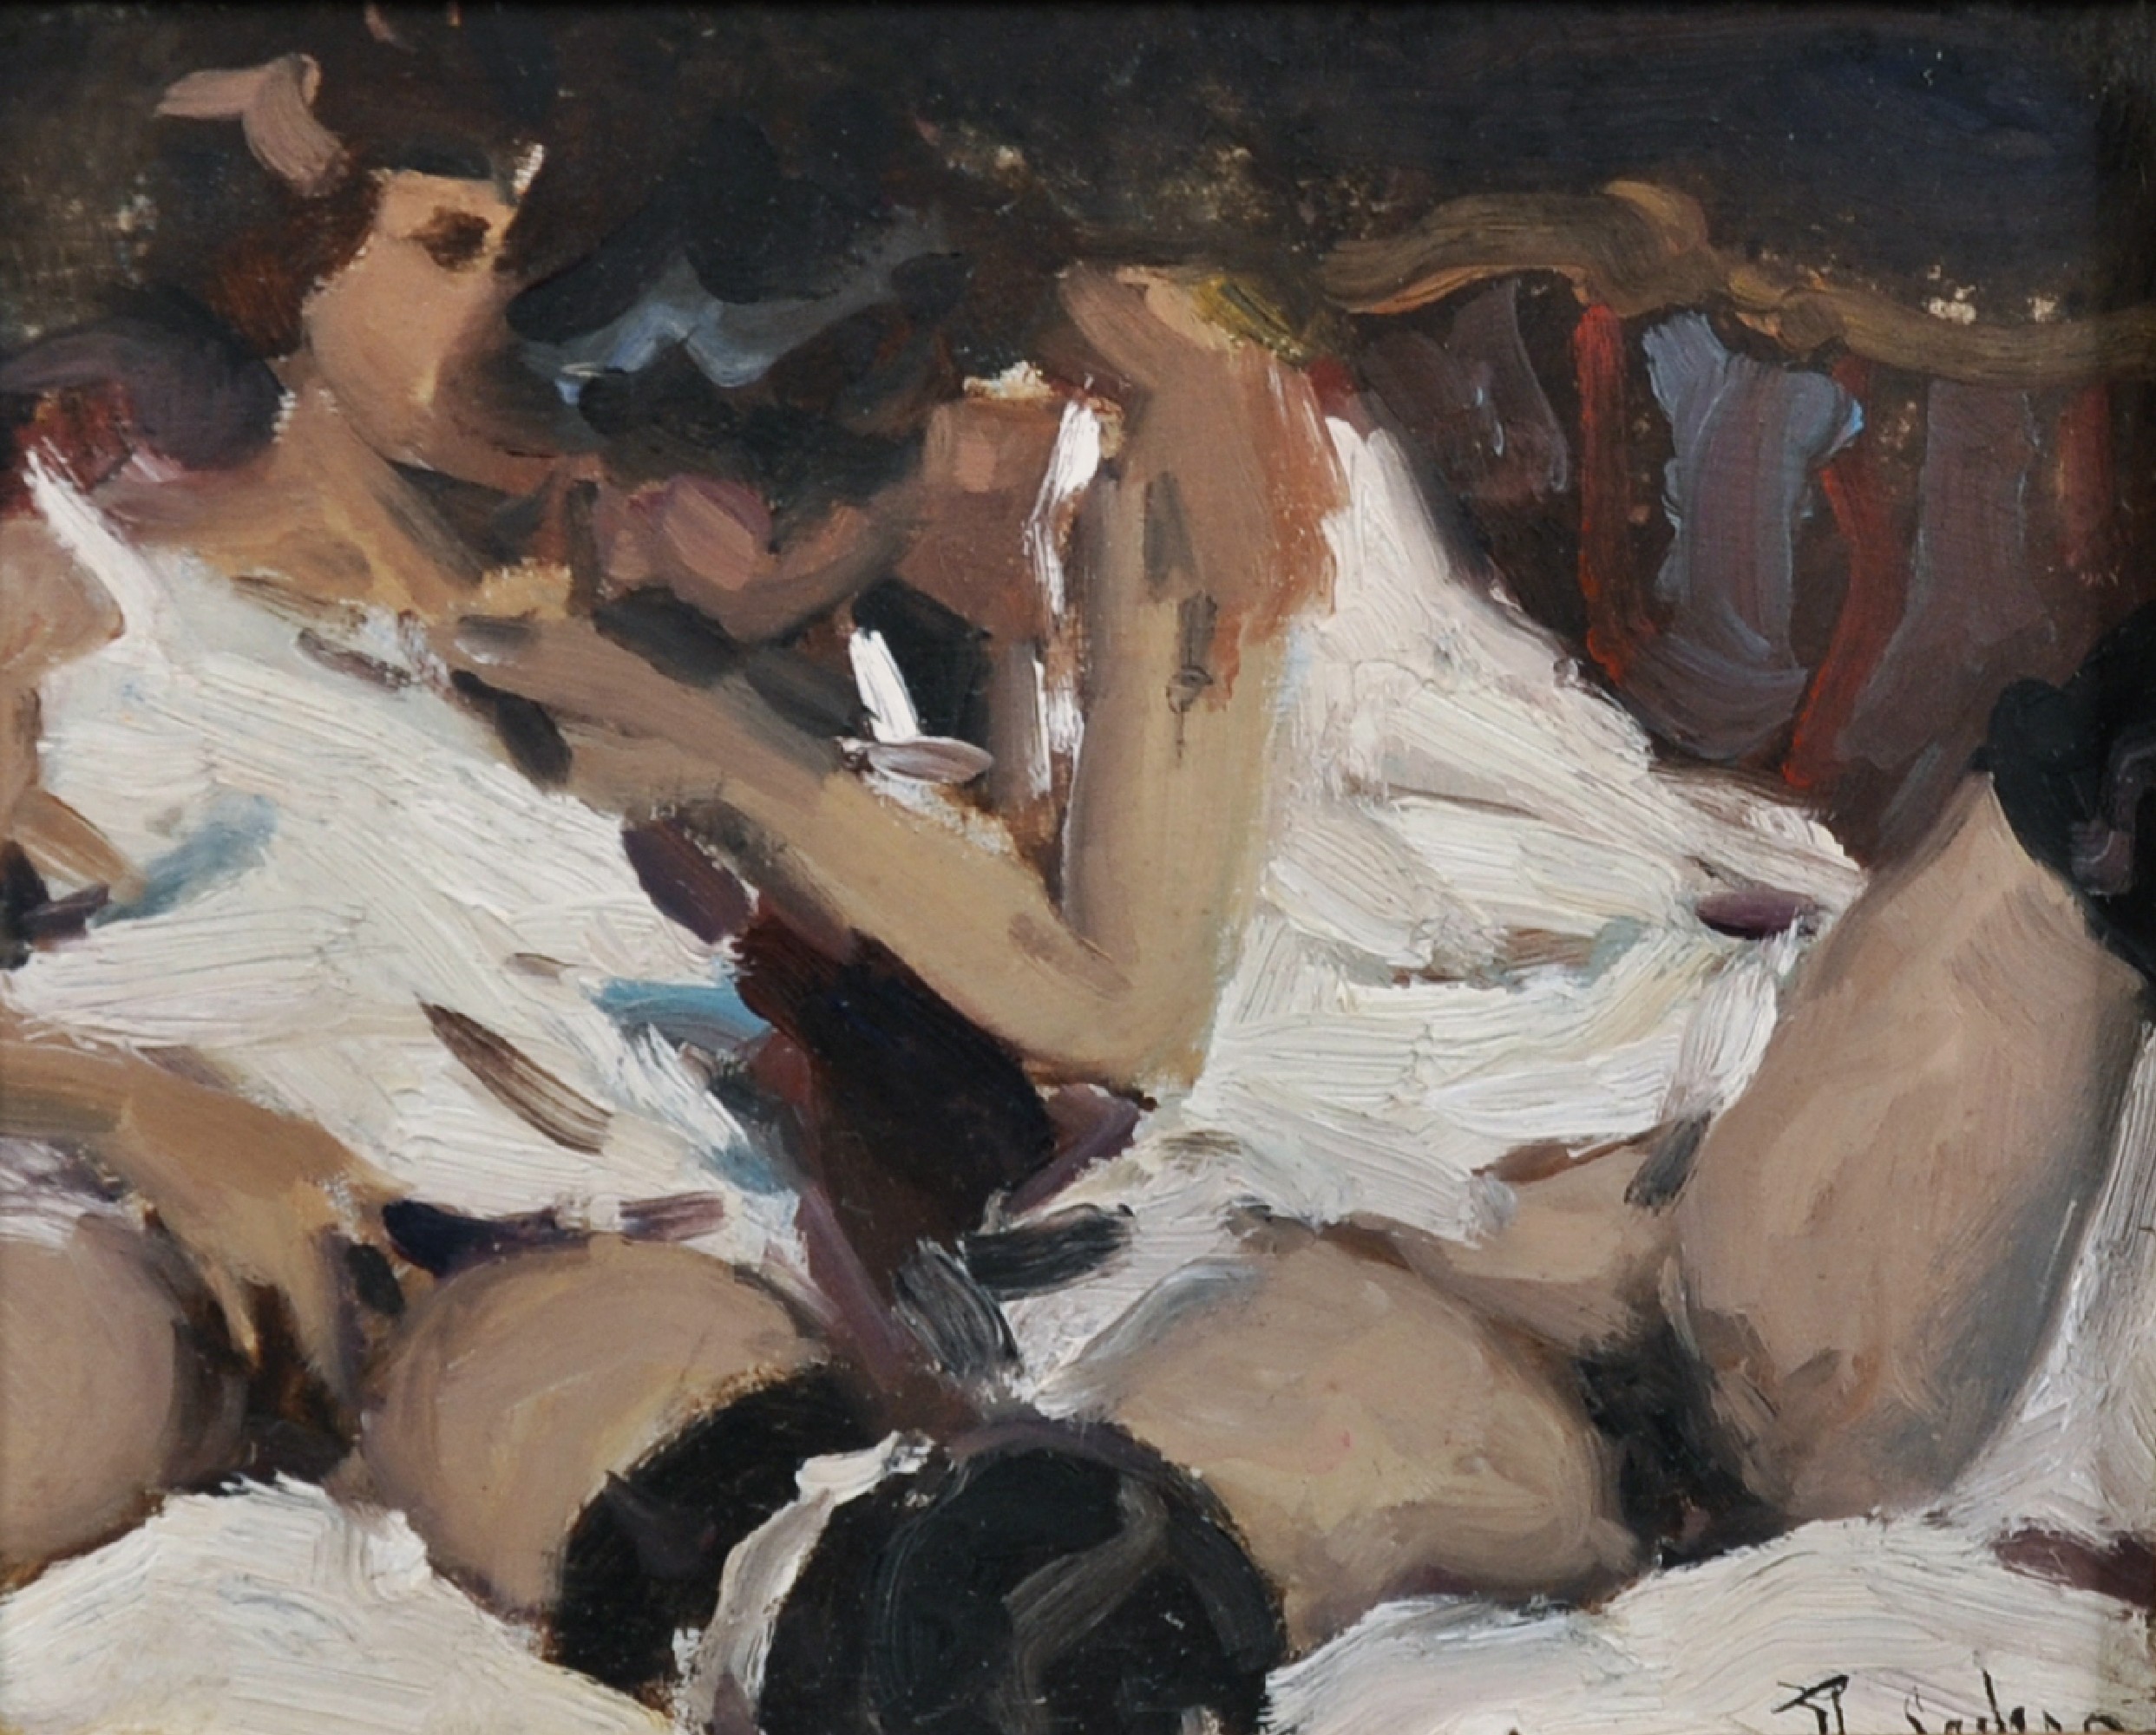 Ken Moroney (1949-2018) British. Figure Study of Two Women on a Bed, Oil on Board, Signed 'JJ